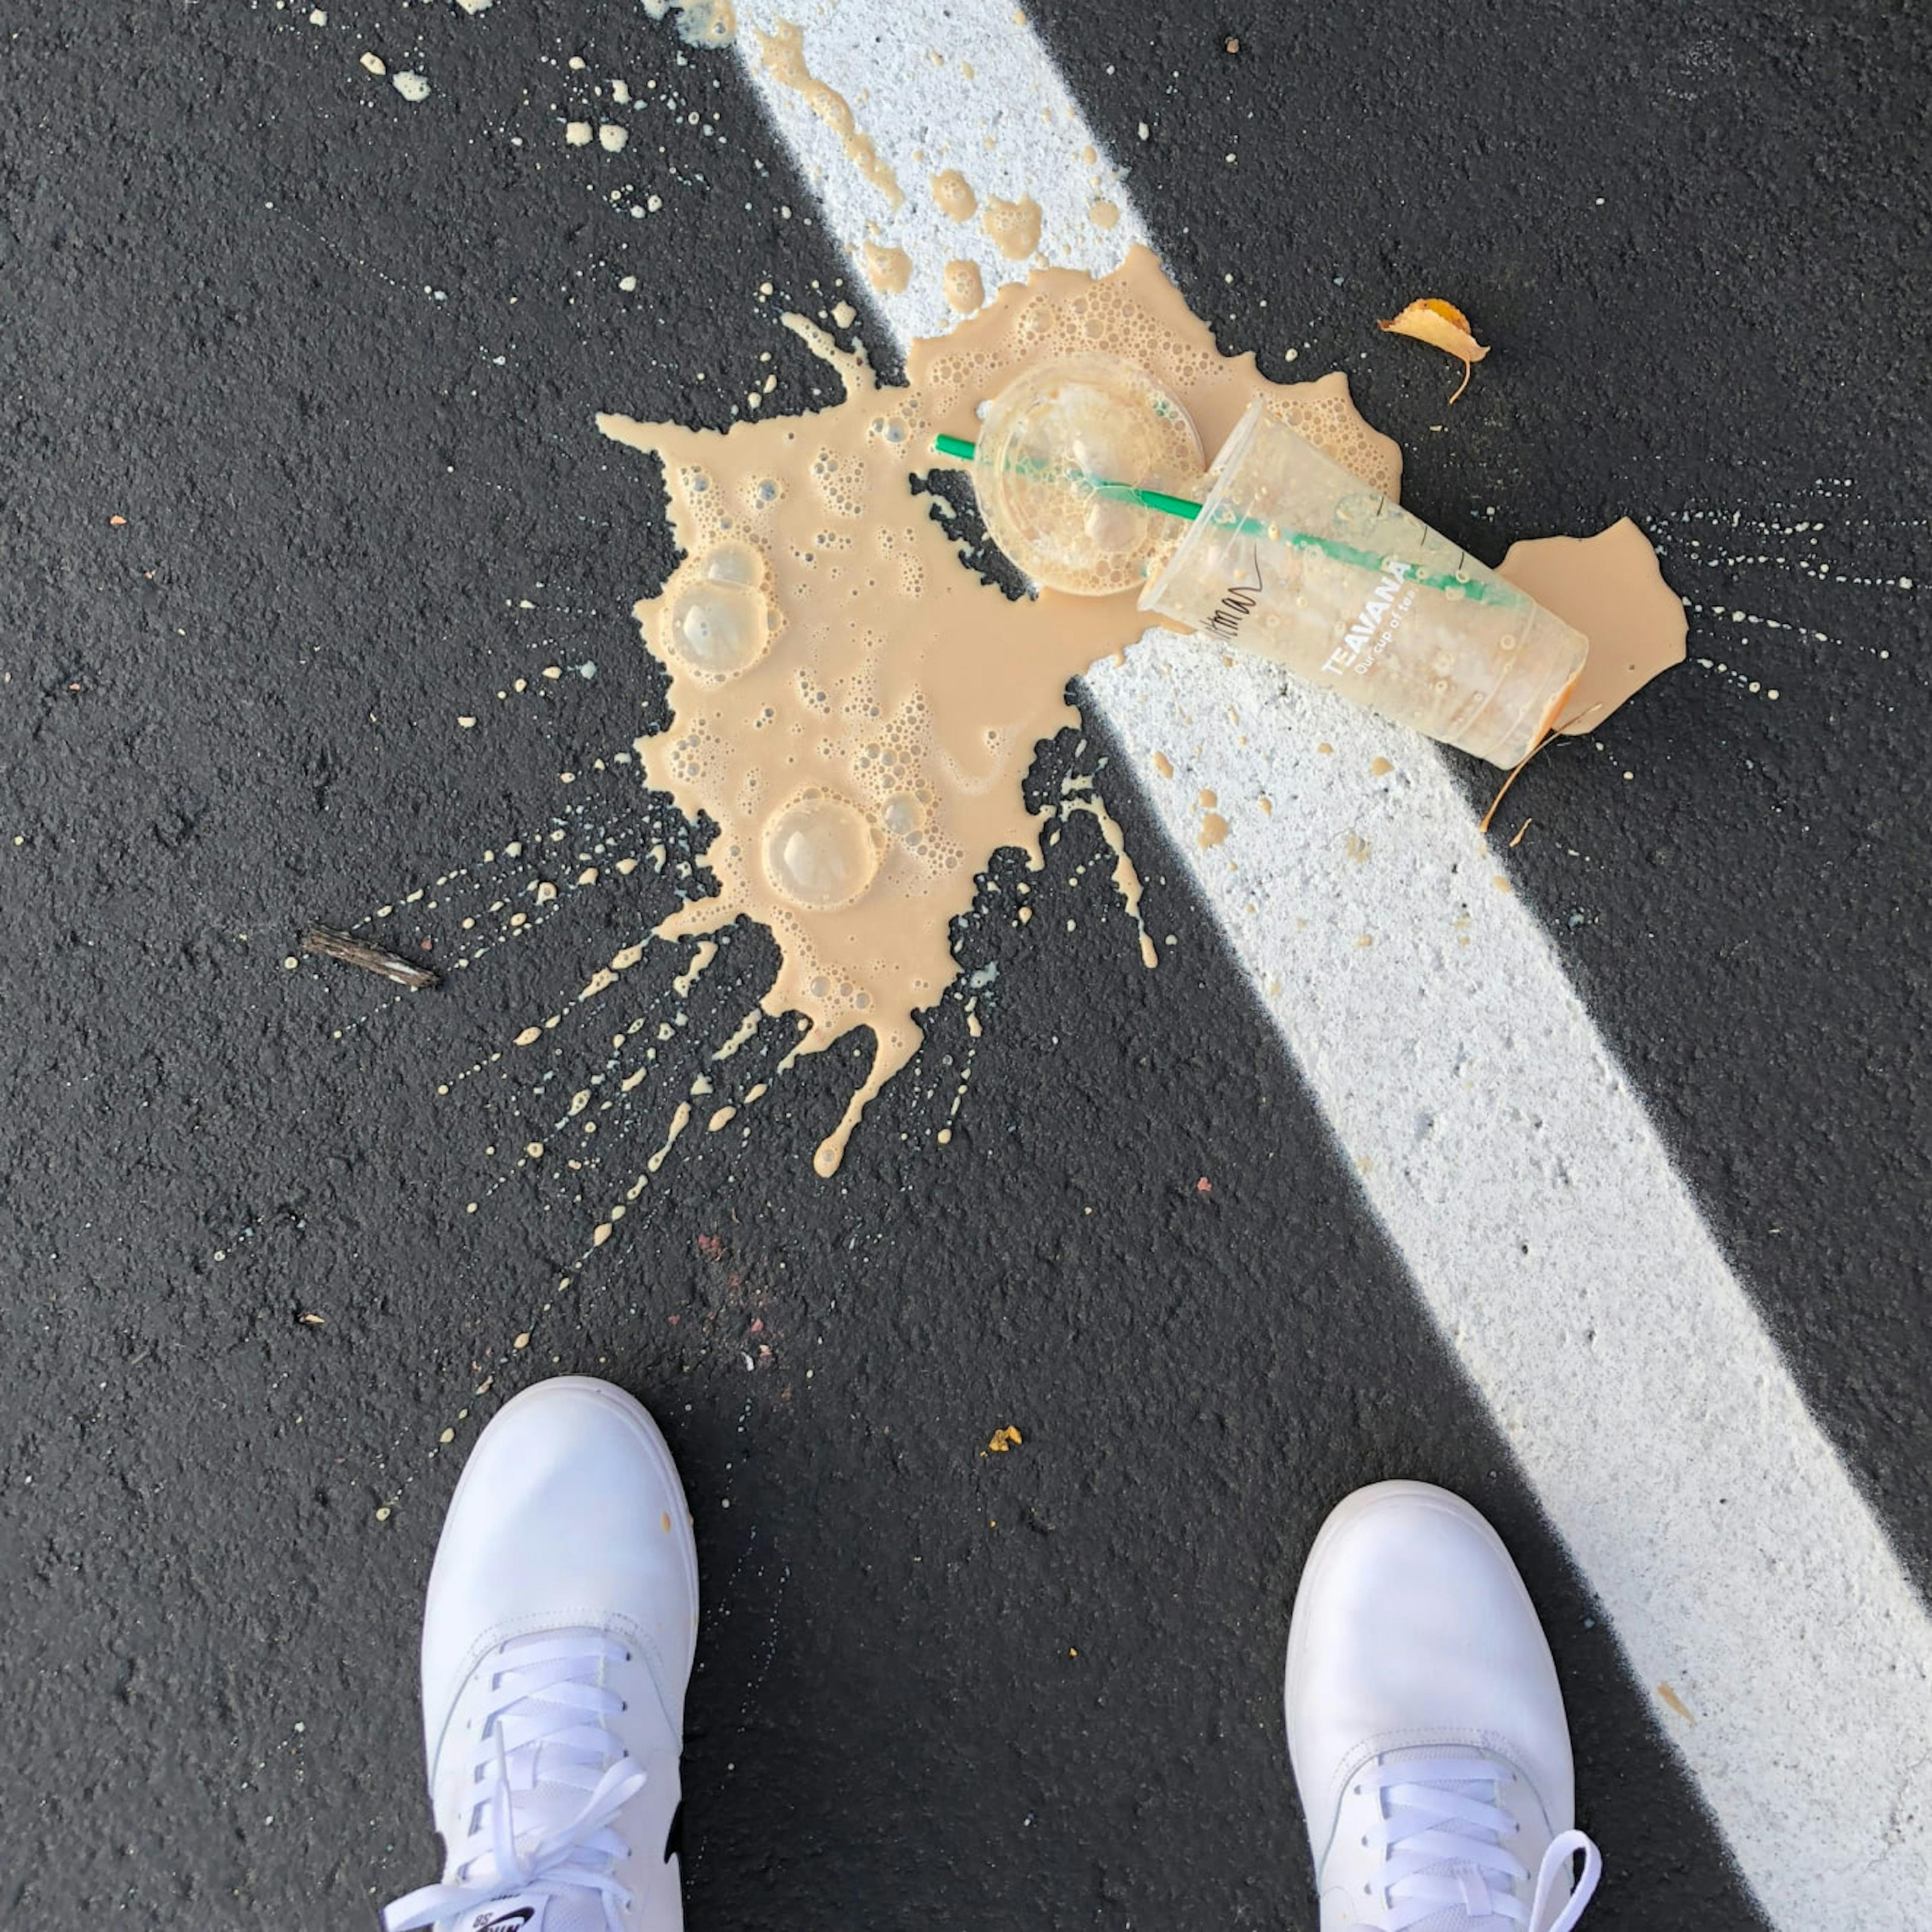 A Starbucks employee drops a coffee drink in surprise after hearing about unionization efforts at another franchise.